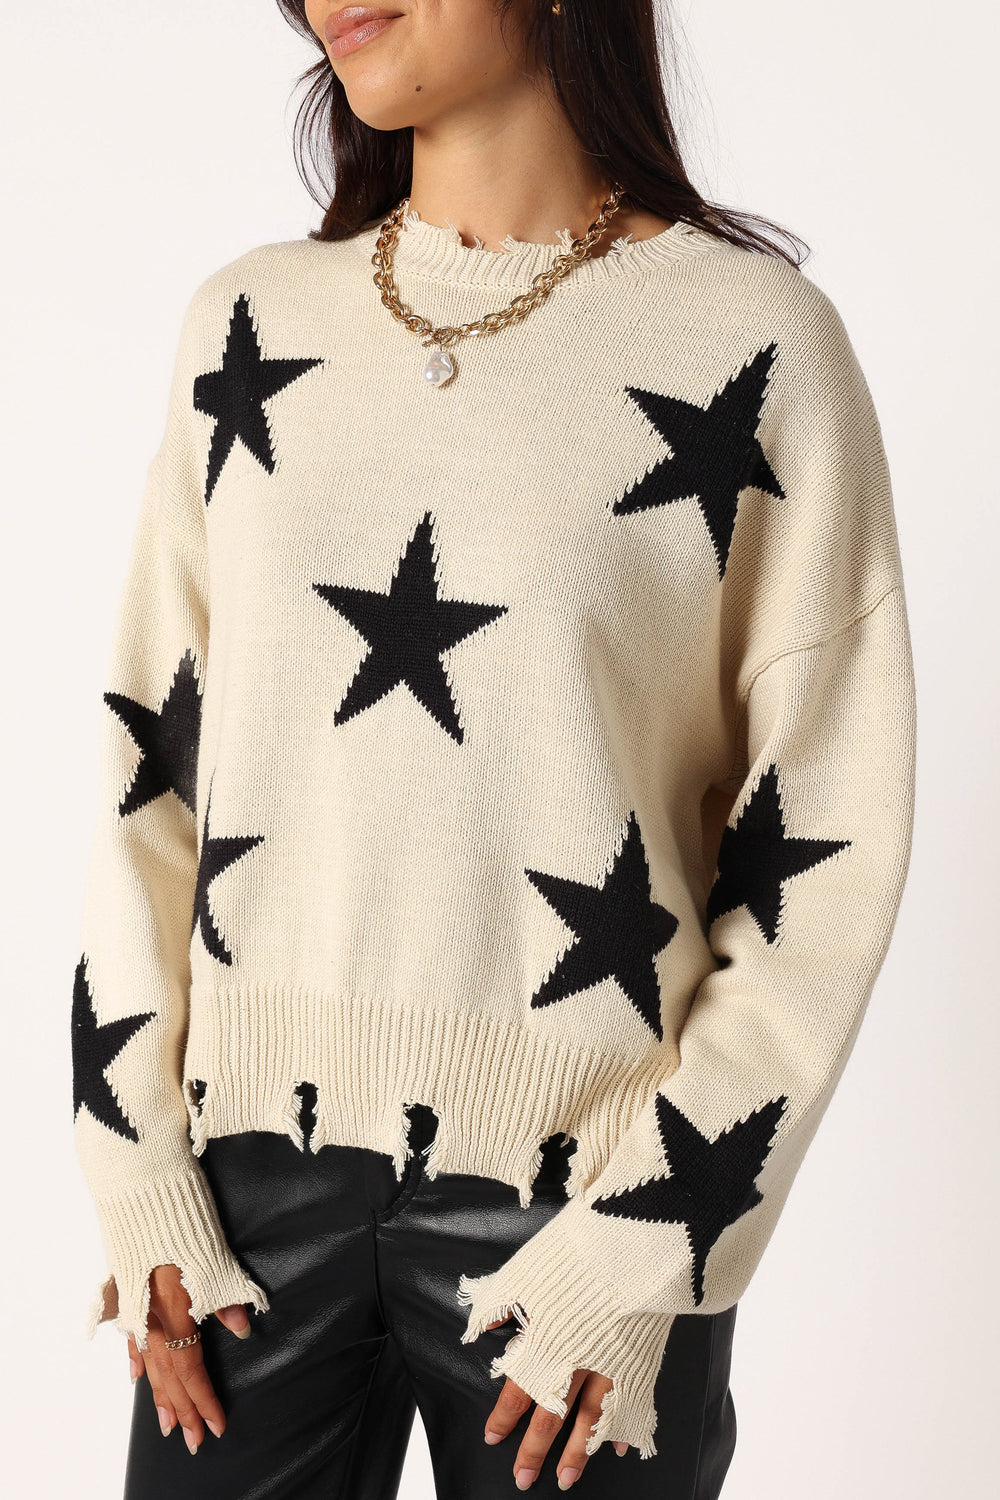 Petal and Pup USA KNITWEAR Star Printed Fray Detail Knit Sweater - Cream/Black